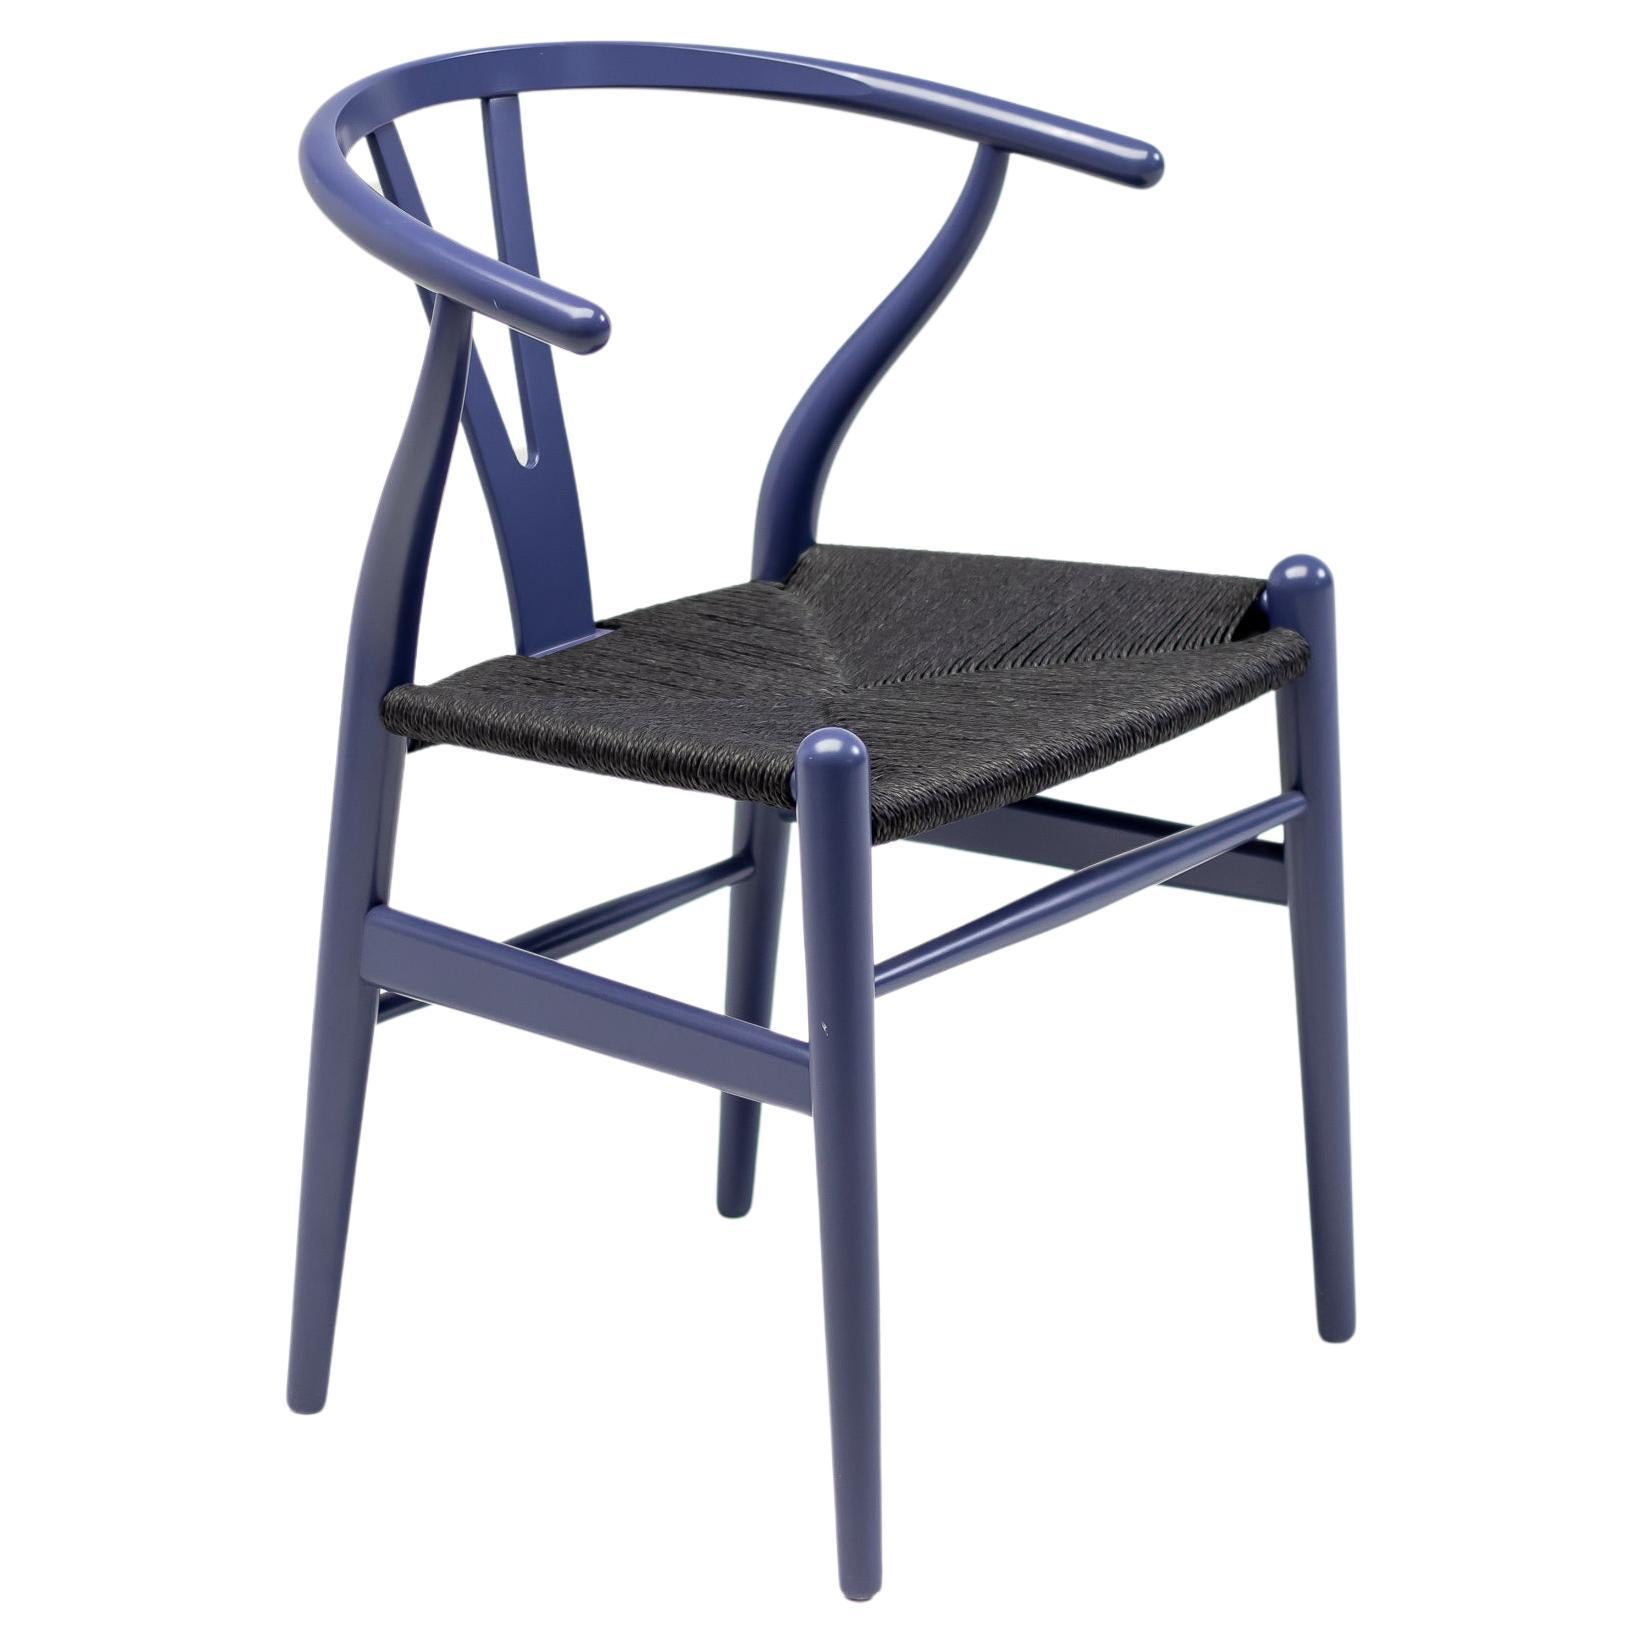 Limited Edition Hans Wegner CH24 Wishbone Chair in Purple with Black Seat